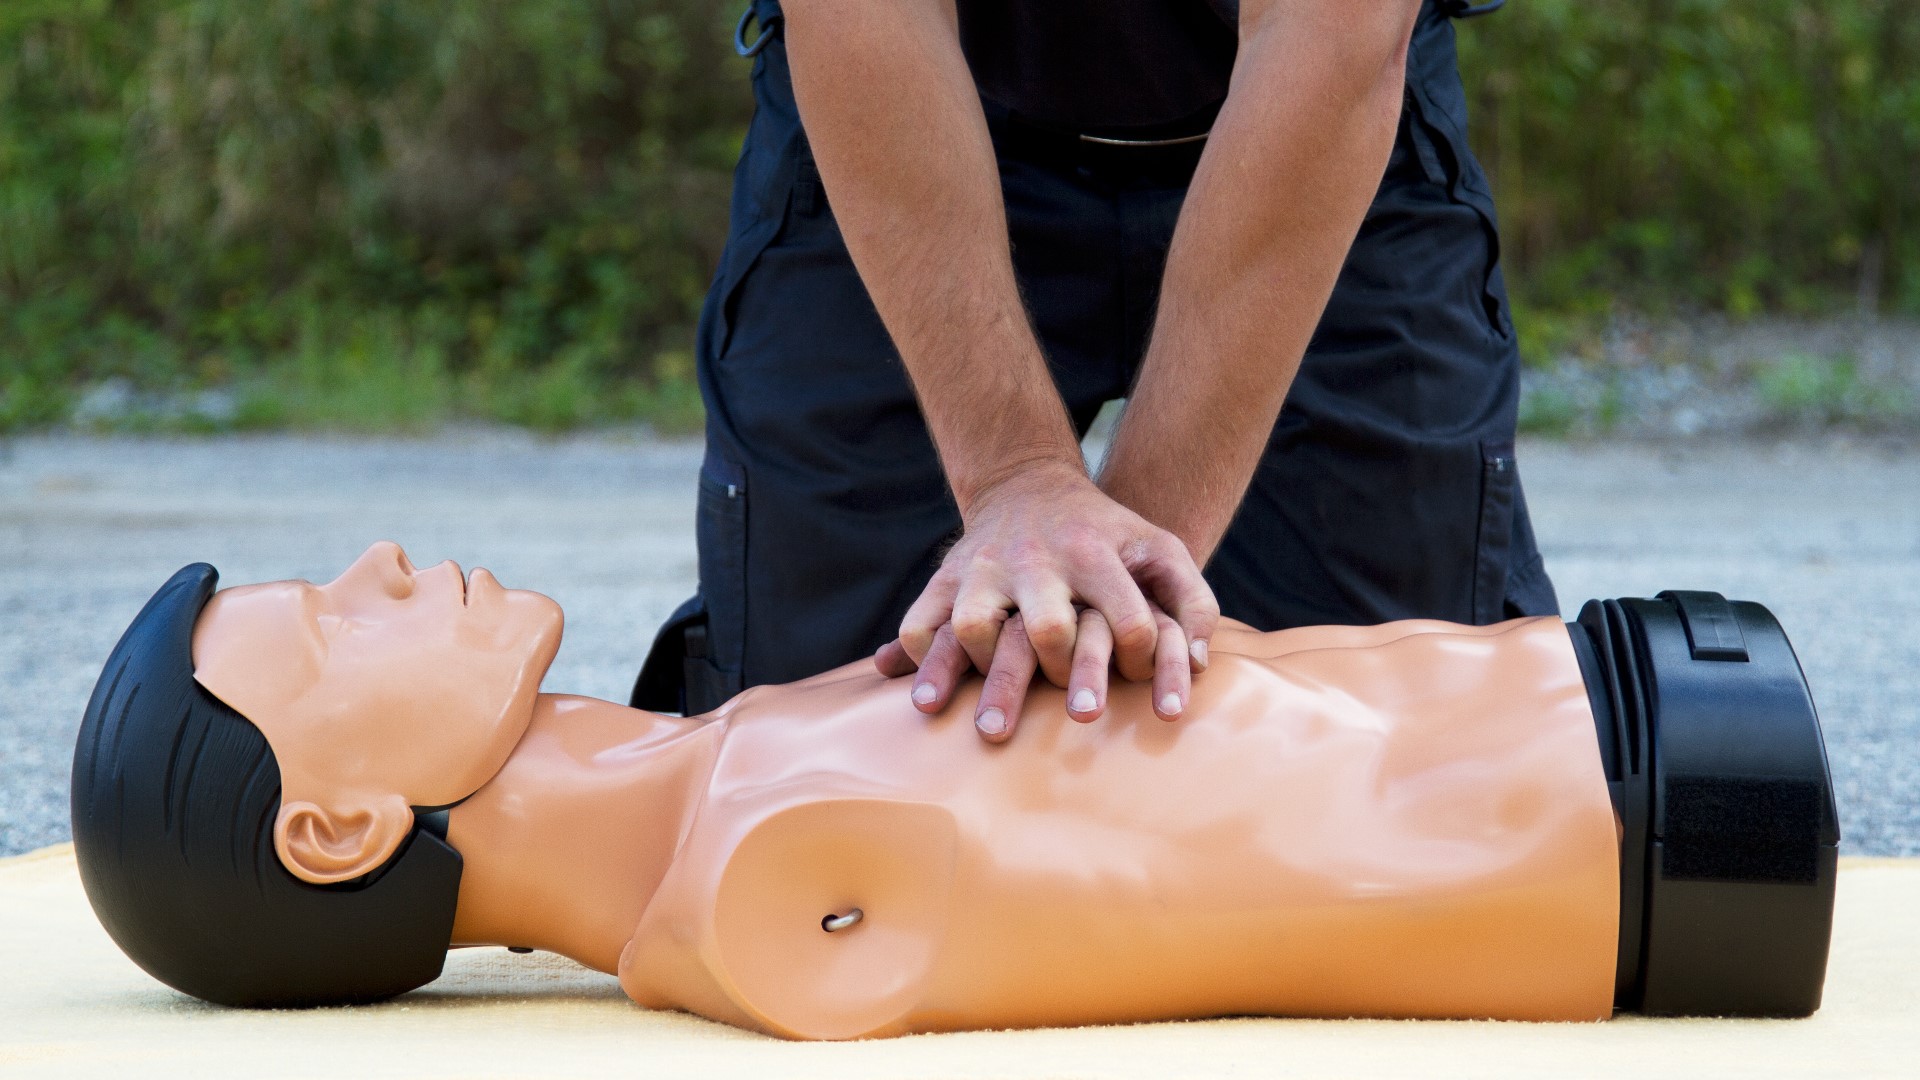 The courses are often only about 30 minutes, after which you walk away knowing the basics that can save a life.